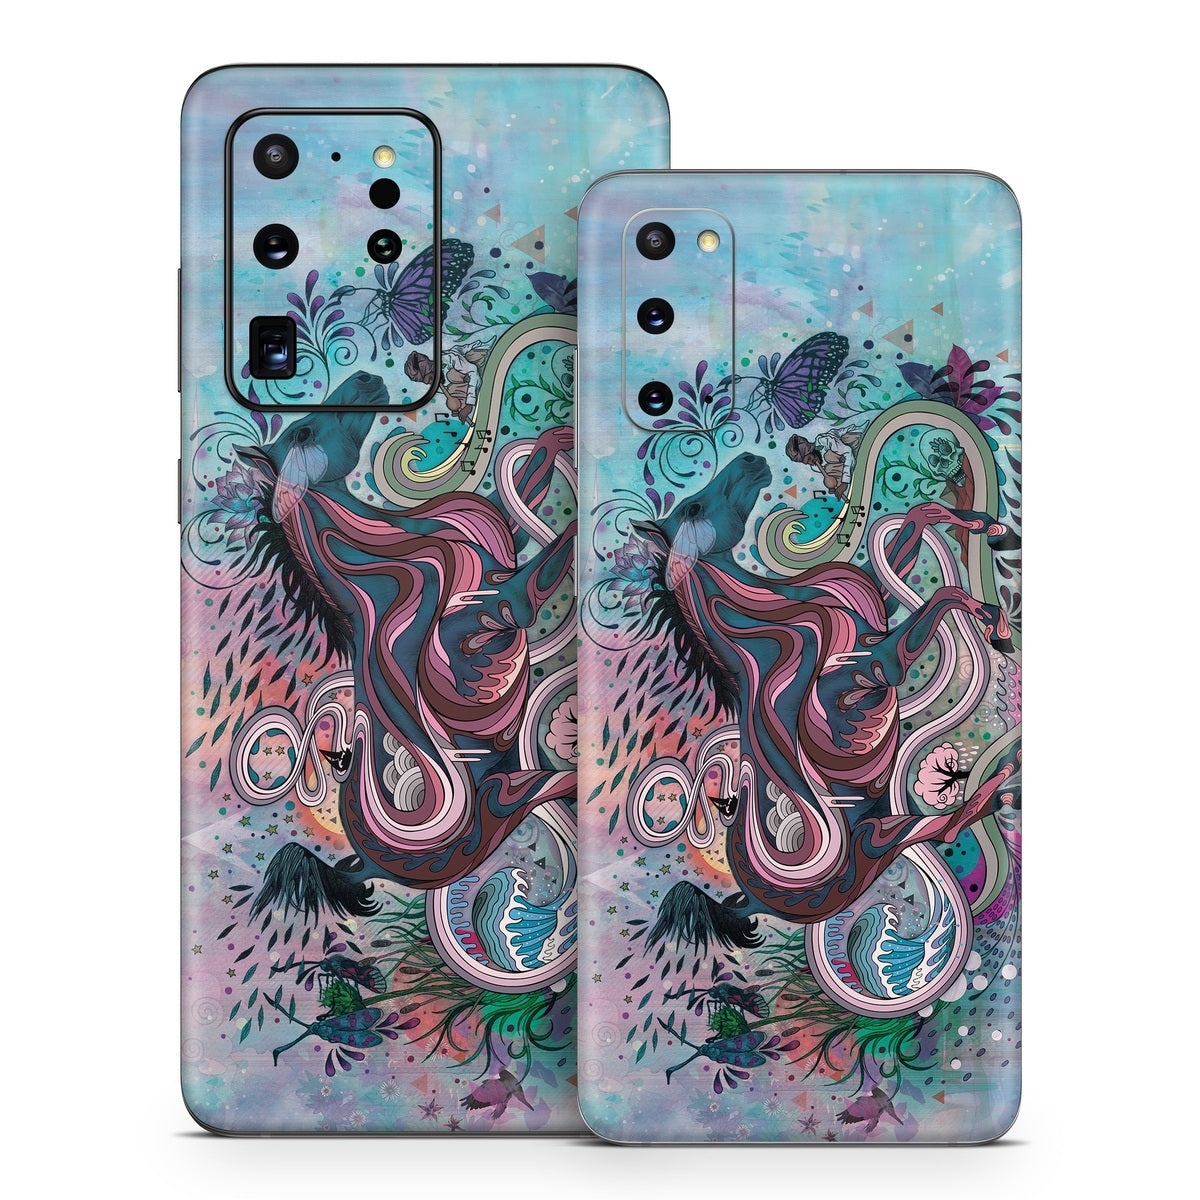 Poetry in Motion - Samsung Galaxy S20 Skin